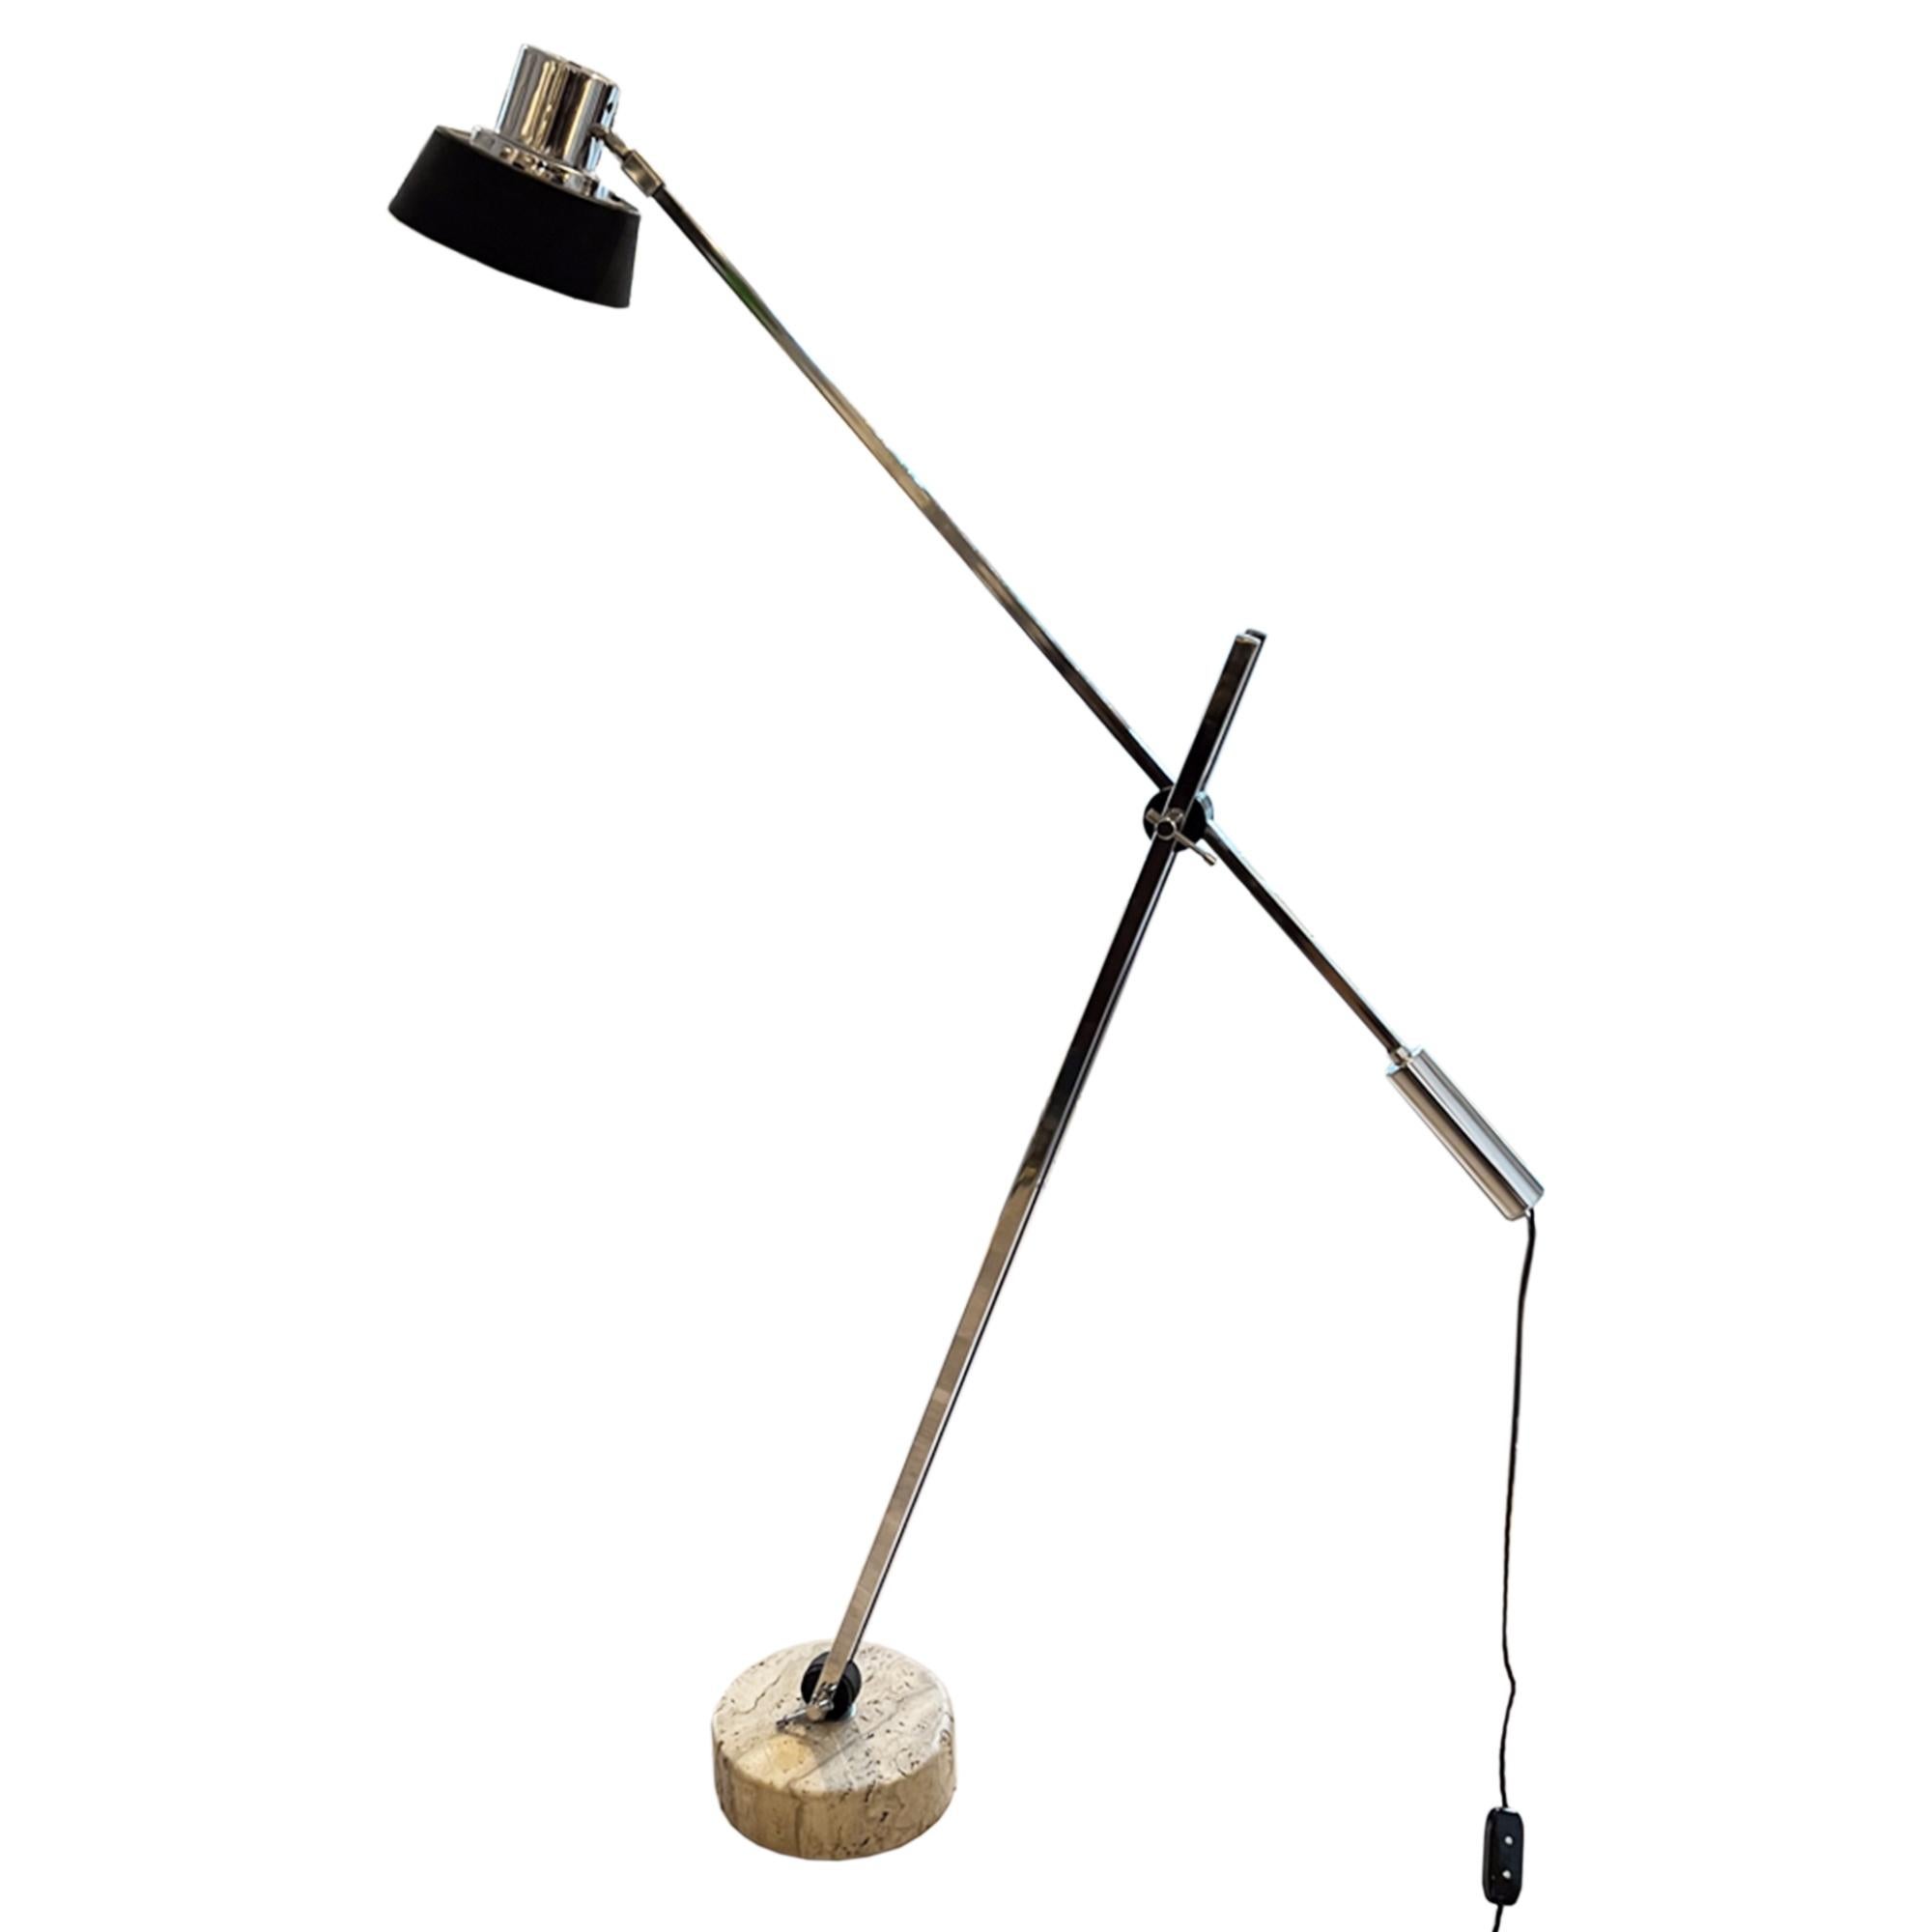 This stylish 1970s floor lamp is fully adjustable and sits on a stable stone base.

Made in Italy to a classic midcentury design.

We've had it rewired for the UK, using a black twisted rope flex. but we can easily adapt for any destination - please